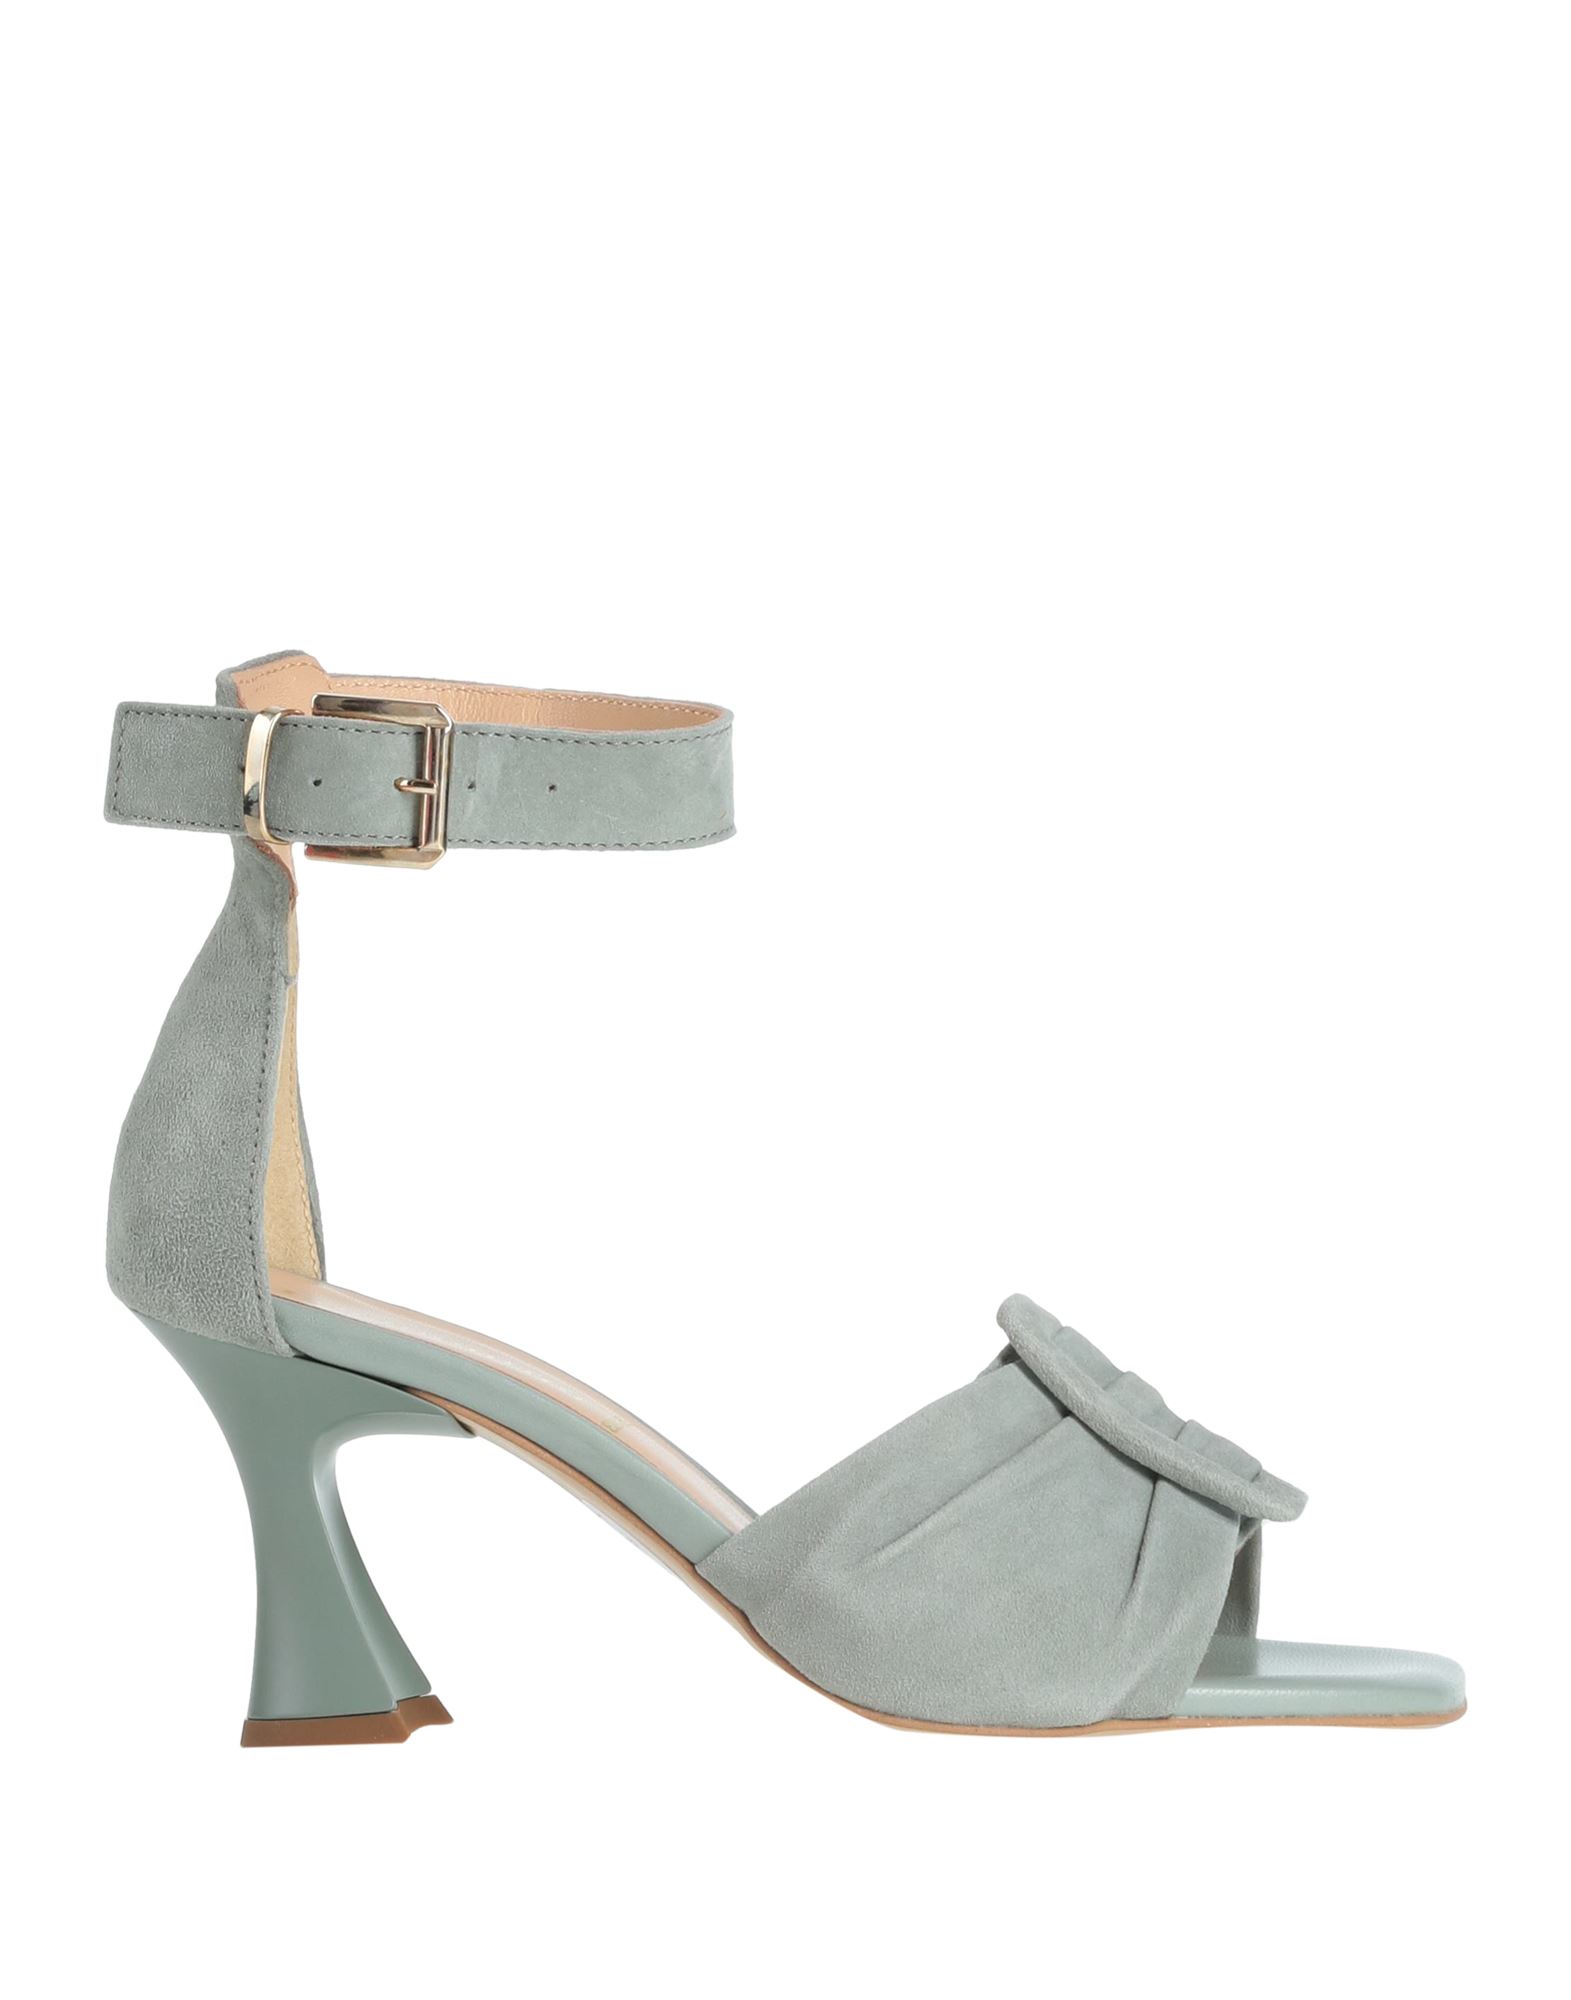 Formentini Sandals In Sage Green